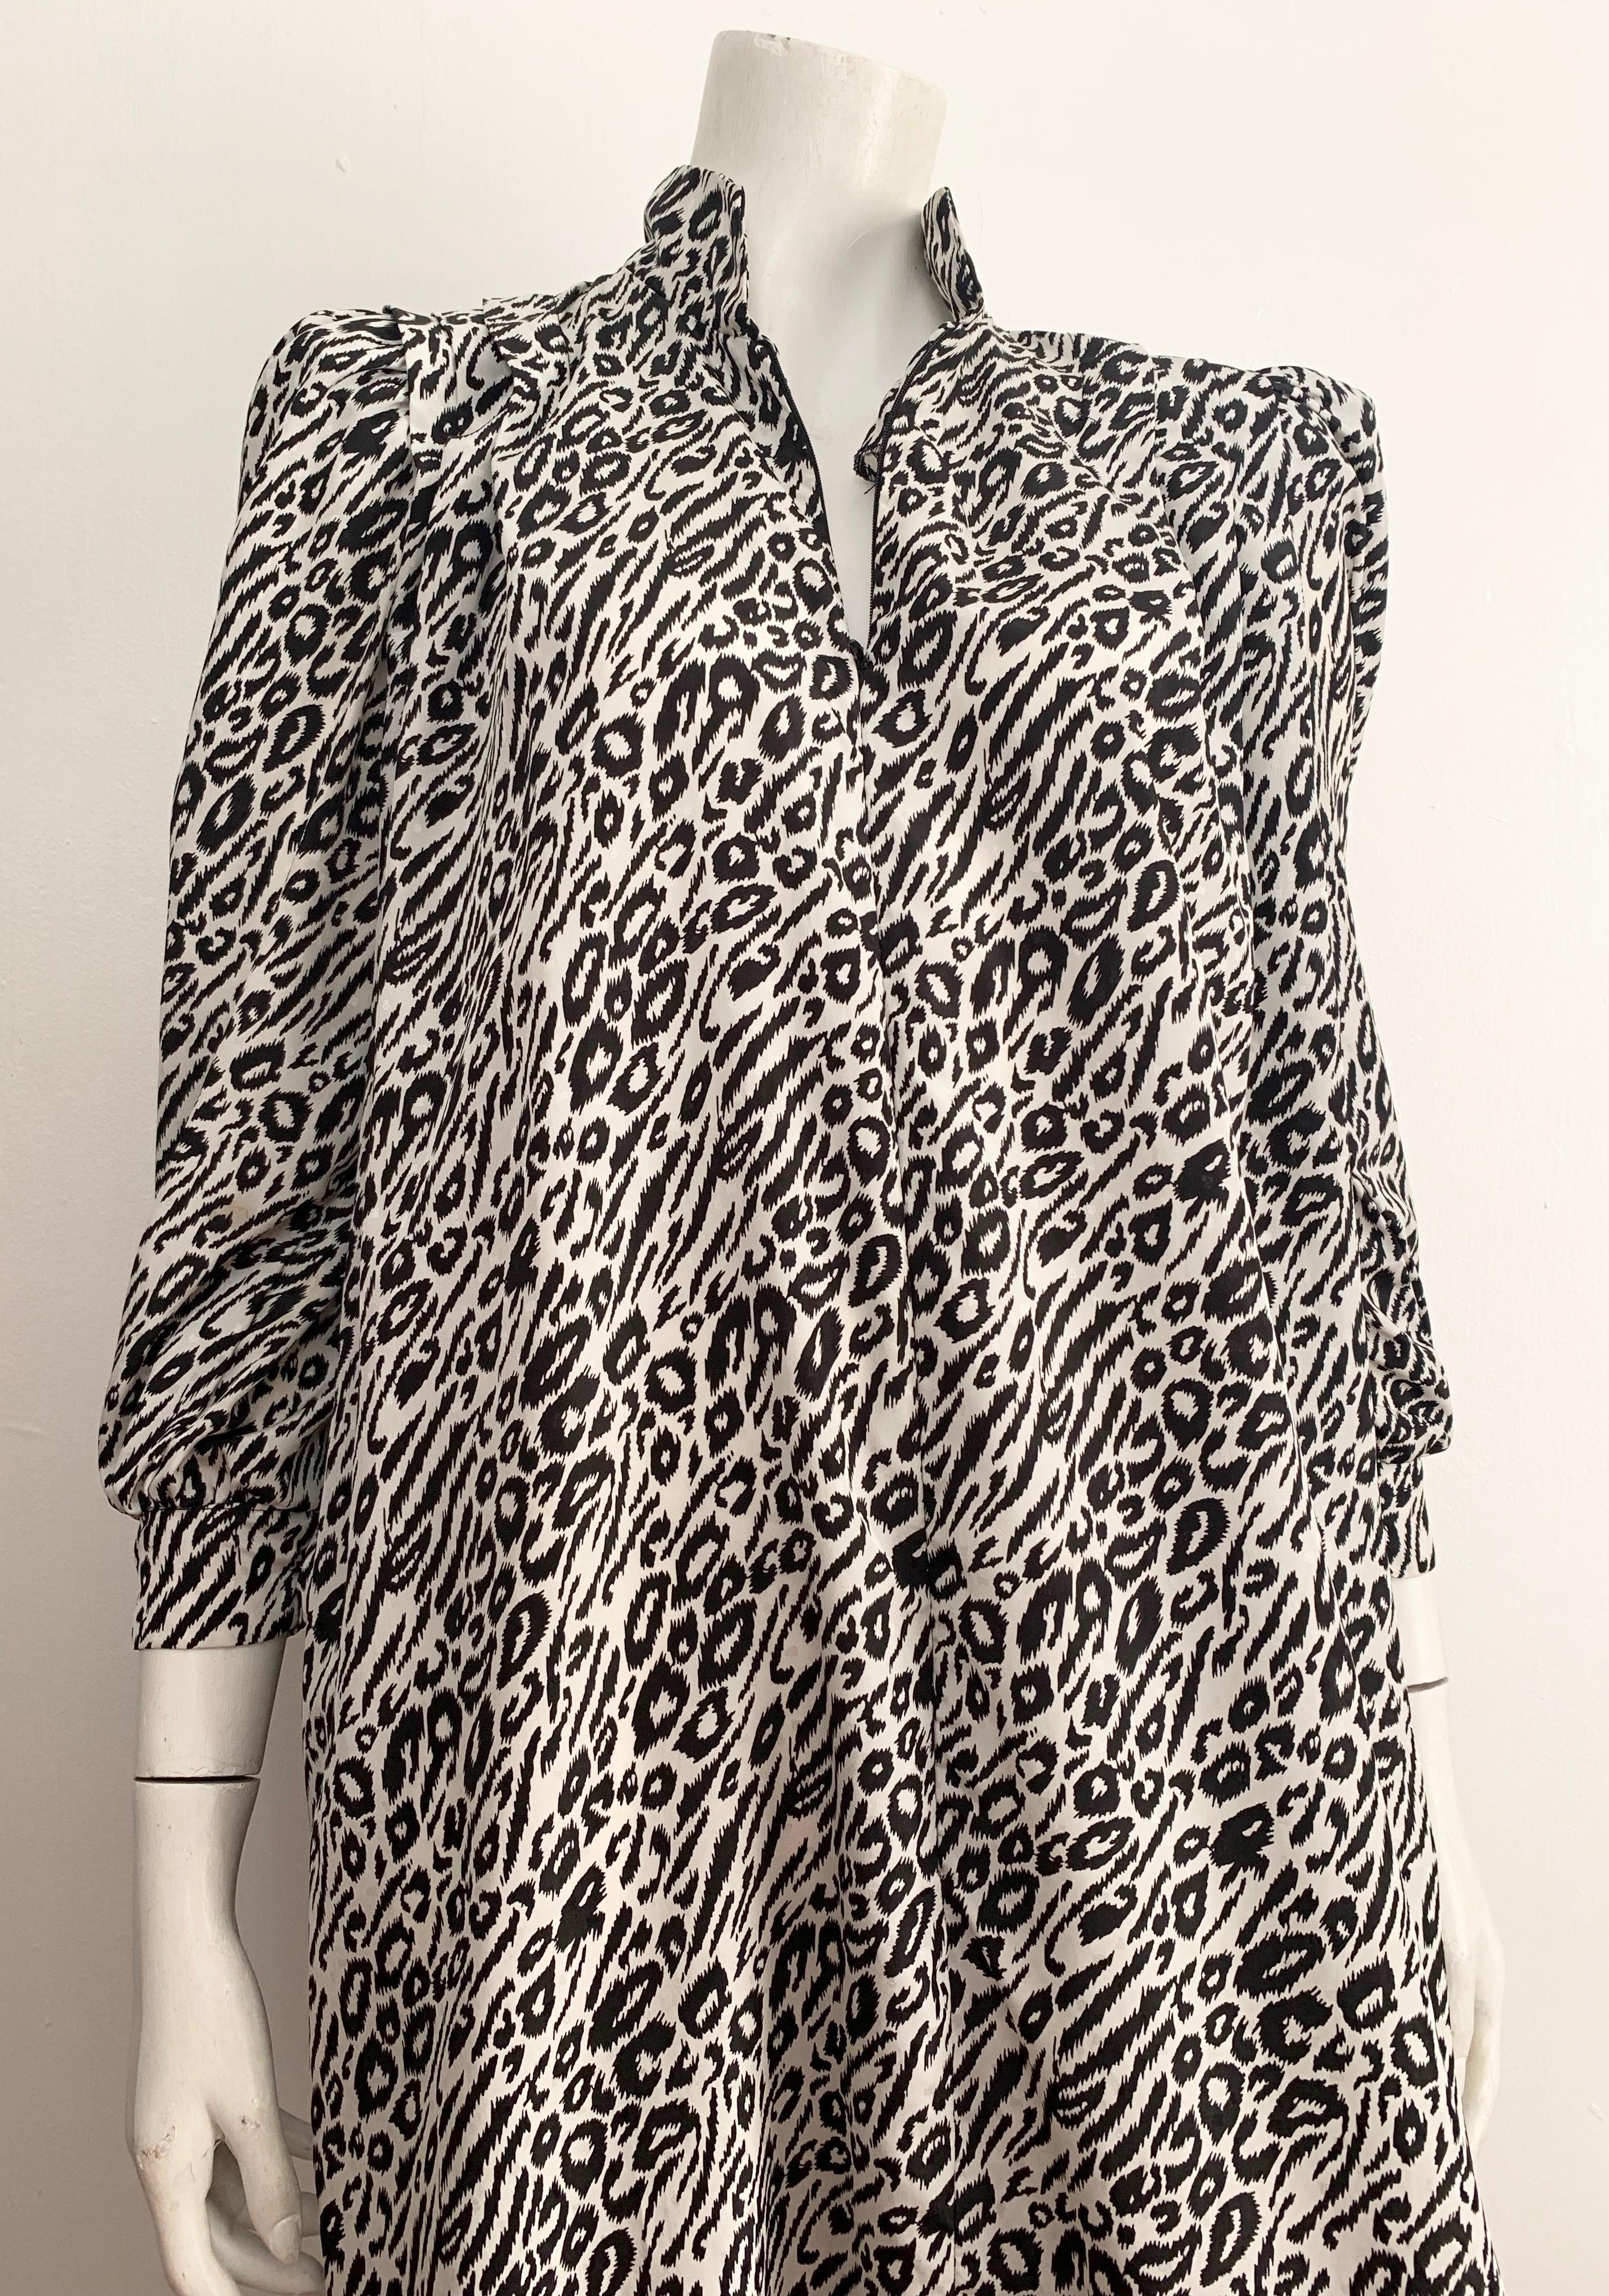 David Brown for Saks Fifth Avenue 1980s black & white print pattern with pockets is labeled a size X-SMALL but this will fit all sizes and belted. 
Belted this will fit a size 4 easily and will fit a size 12 just as easy.
Zipper front.
No shoulder